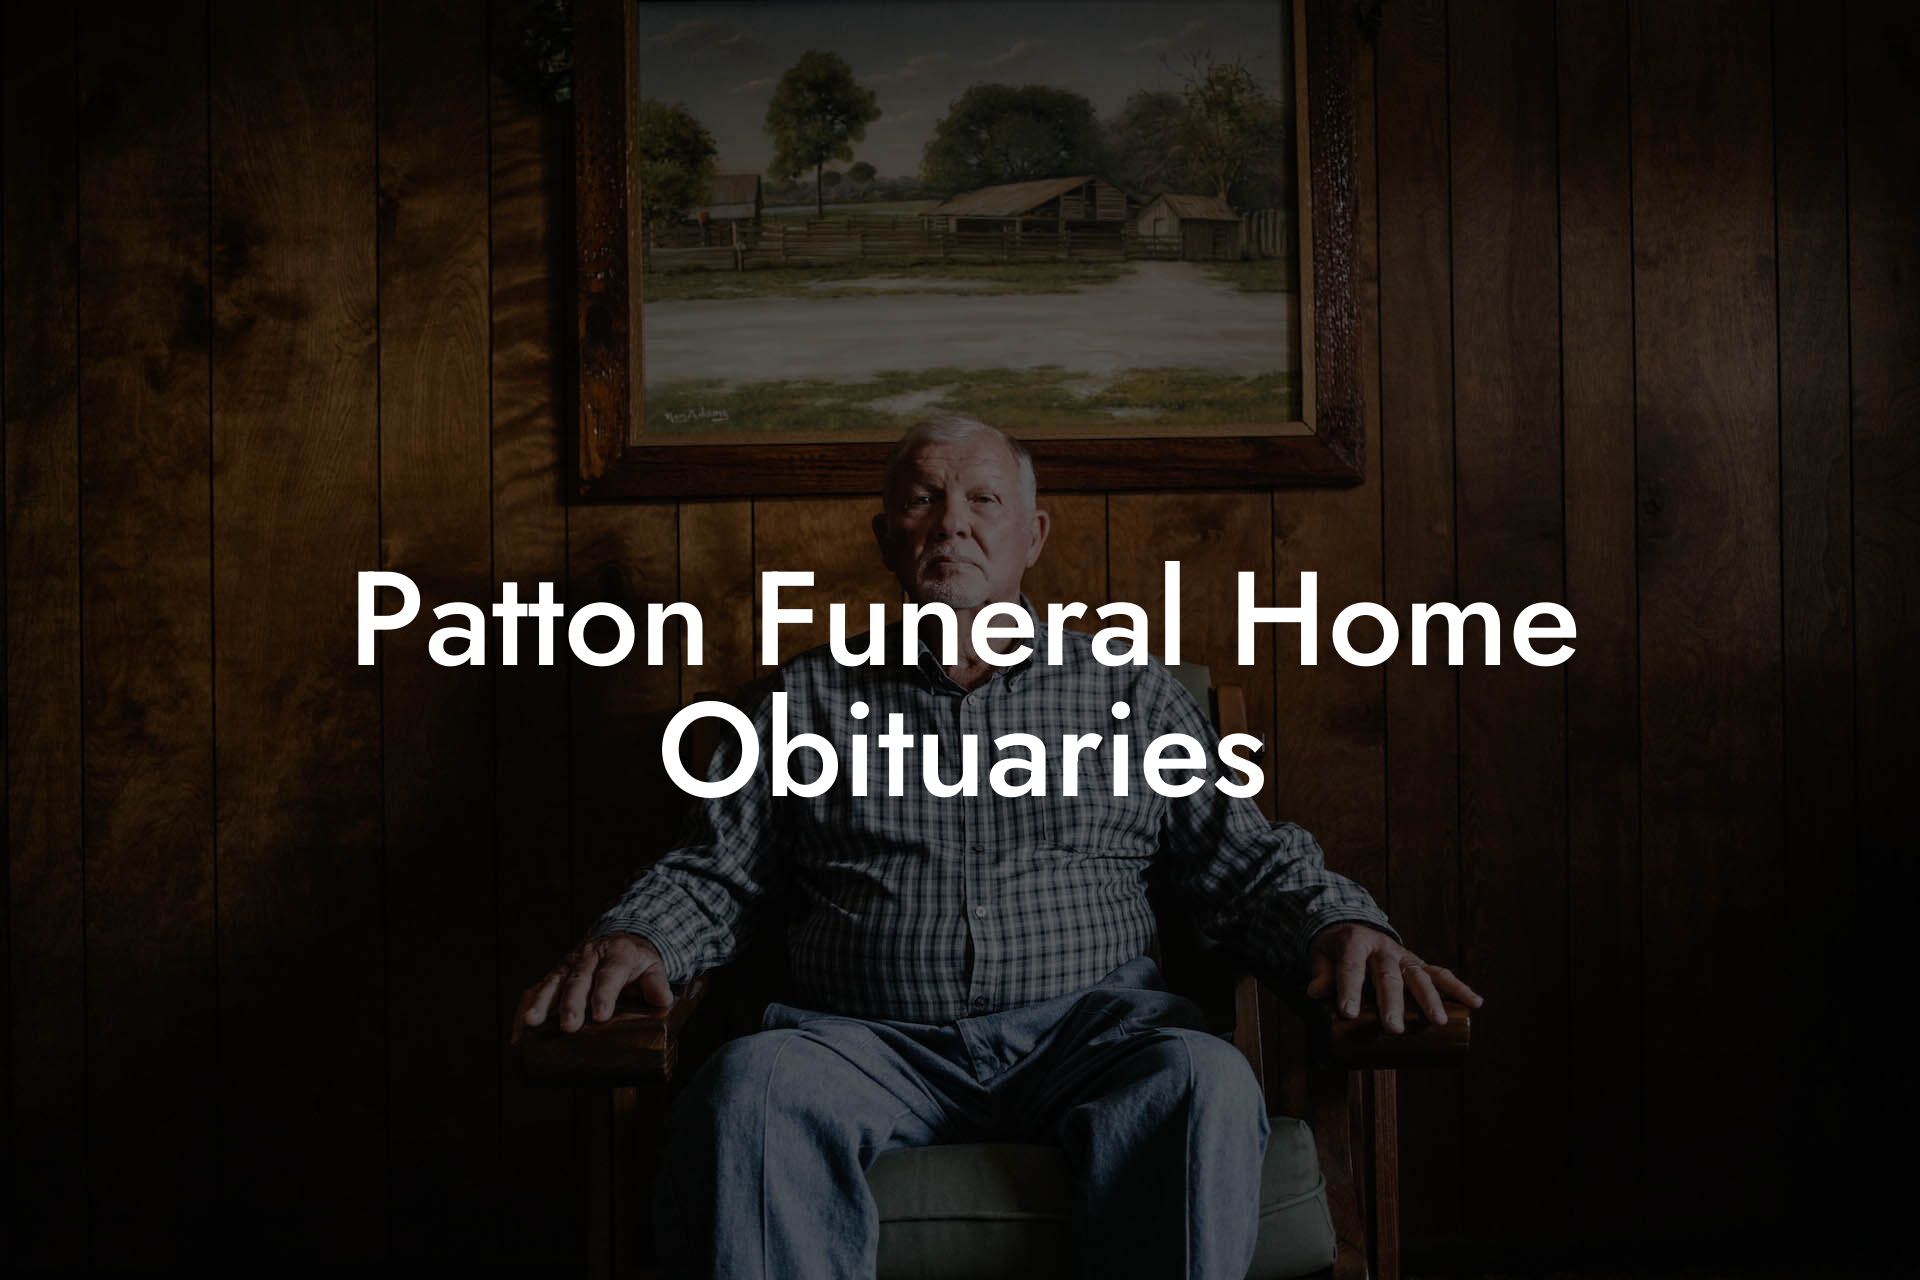 Patton Funeral Home Obituaries